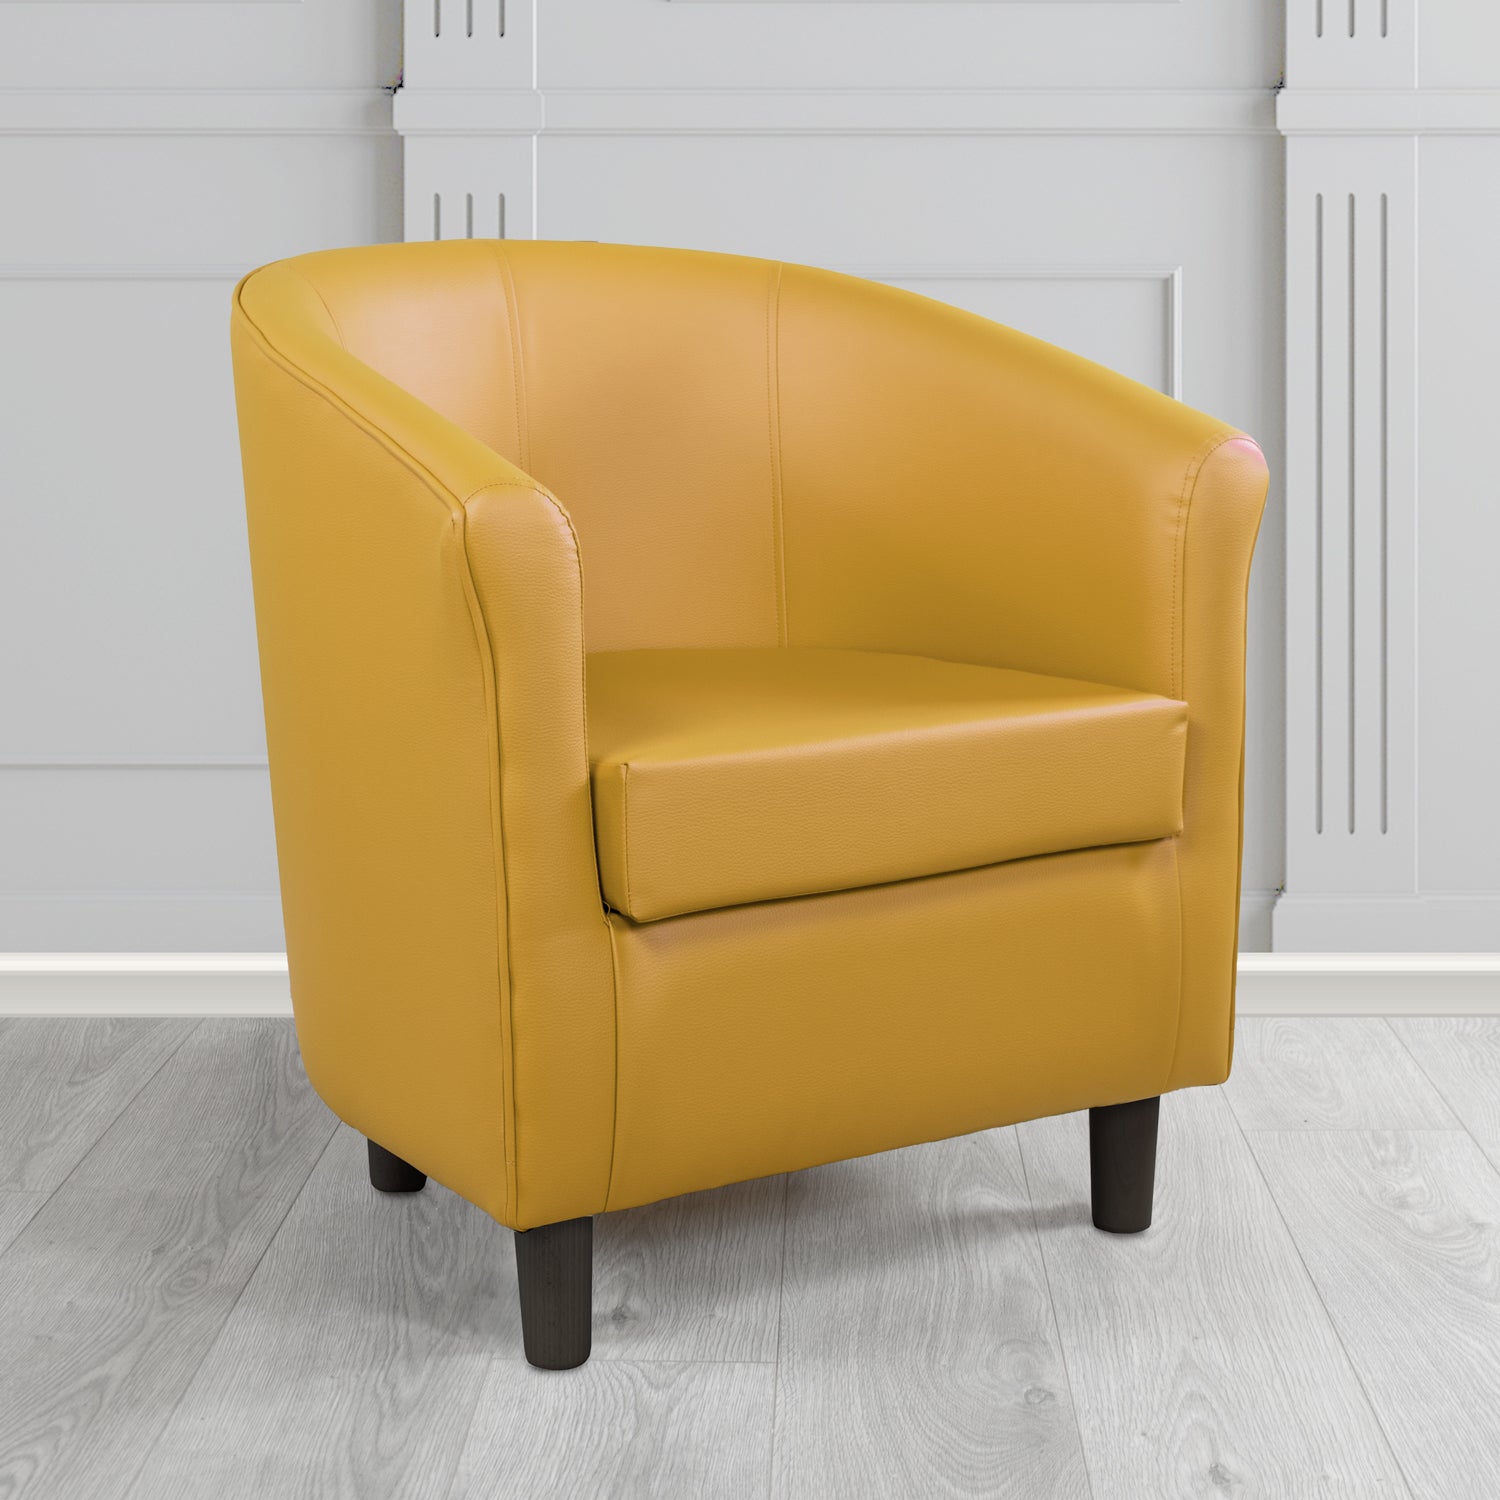 Tuscany Just Colour Golden Honey Antimicrobial Crib 5 Contract Faux Leather Tub Chair - The Tub Chair Shop